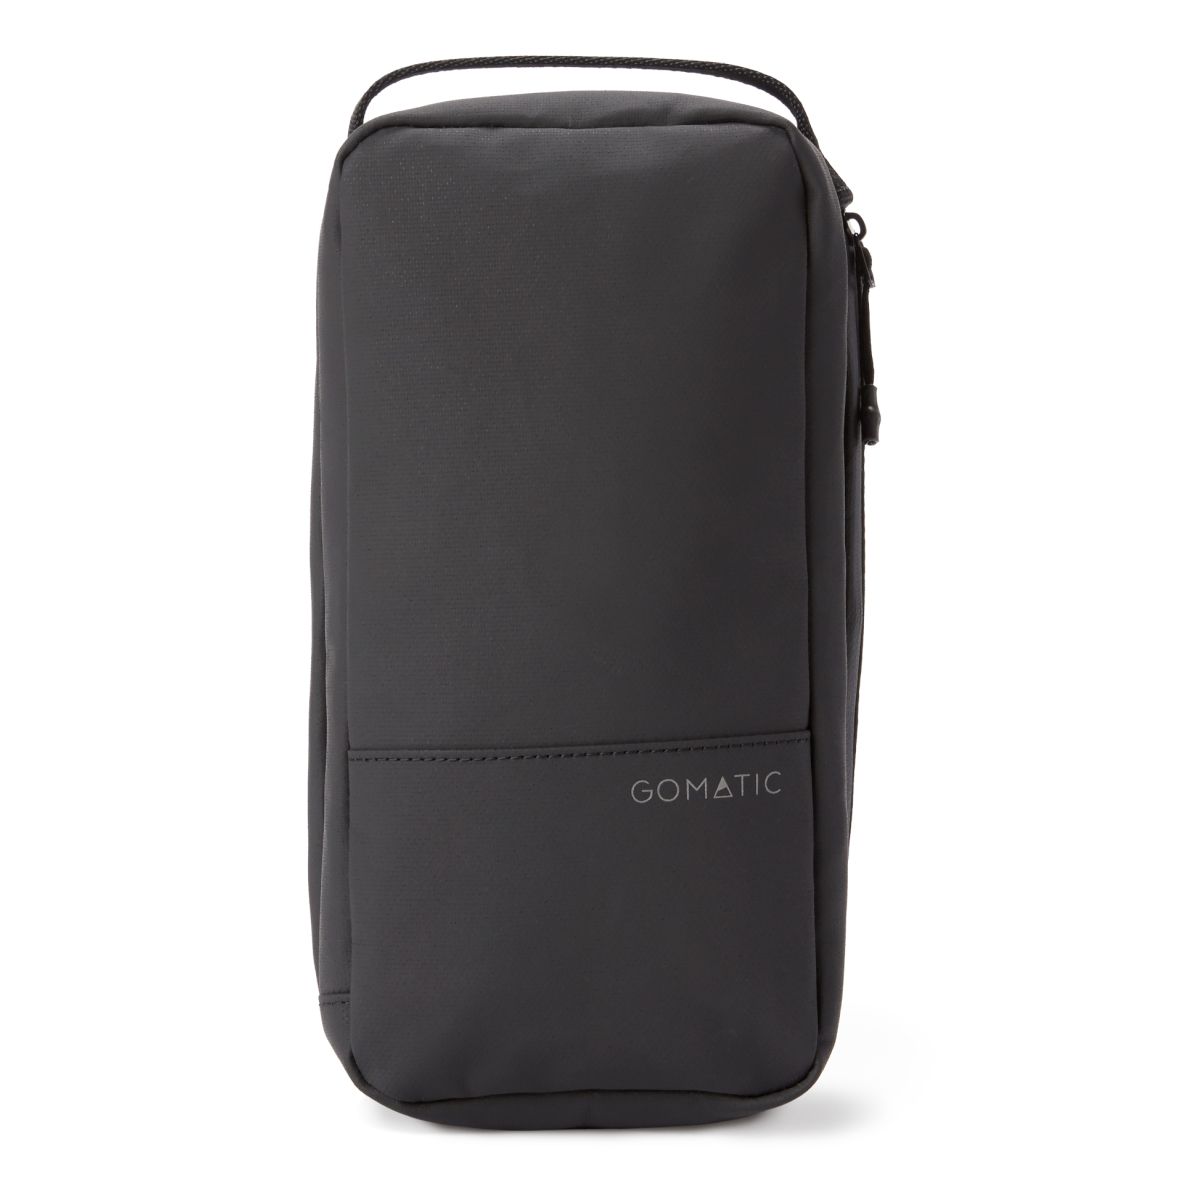 Gomatic Toiletry Bag 2.0 Large